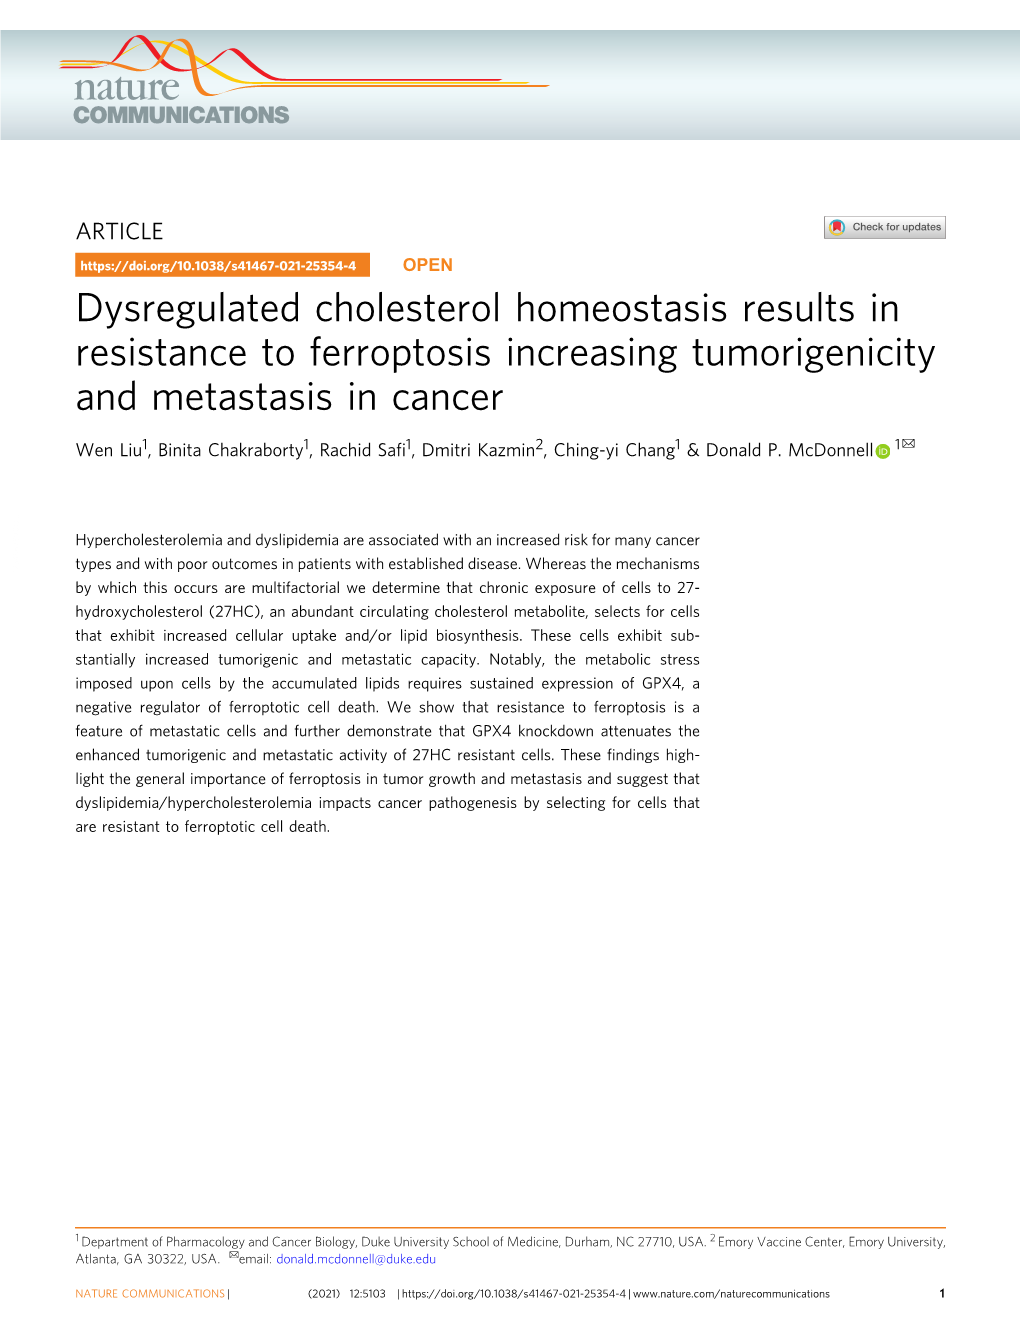 Dysregulated Cholesterol Homeostasis Results in Resistance to Ferroptosis